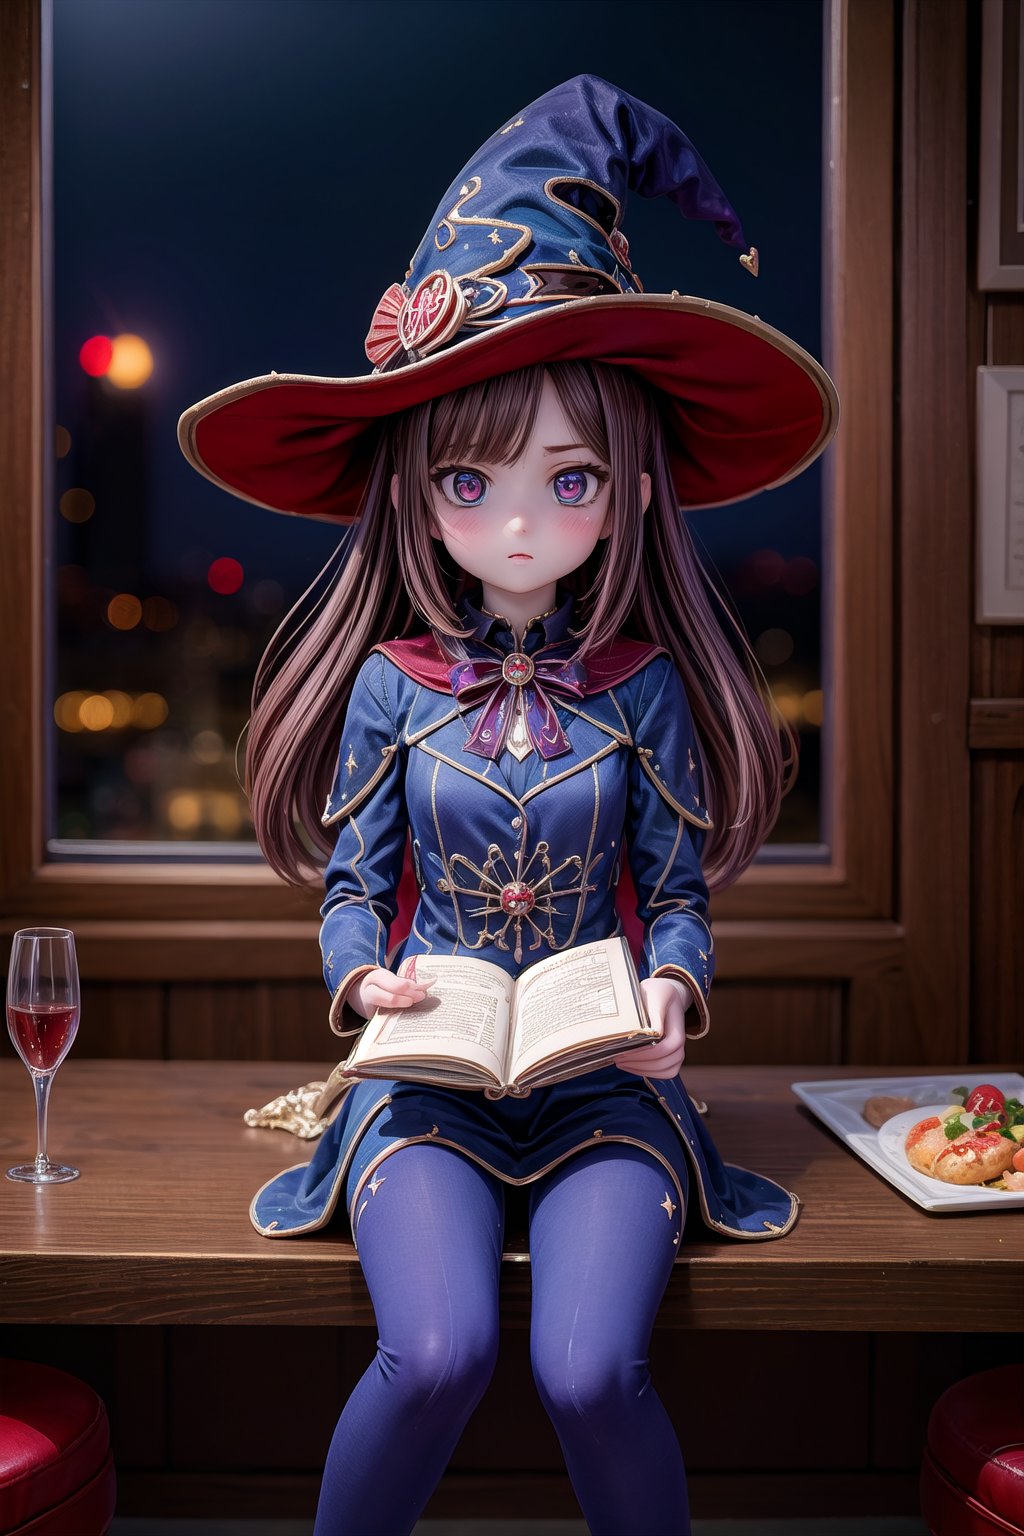 Mona_Impact, full_body, beautiful 25 years old girl, blurry_background, witch hat, sitting in a restaurant,